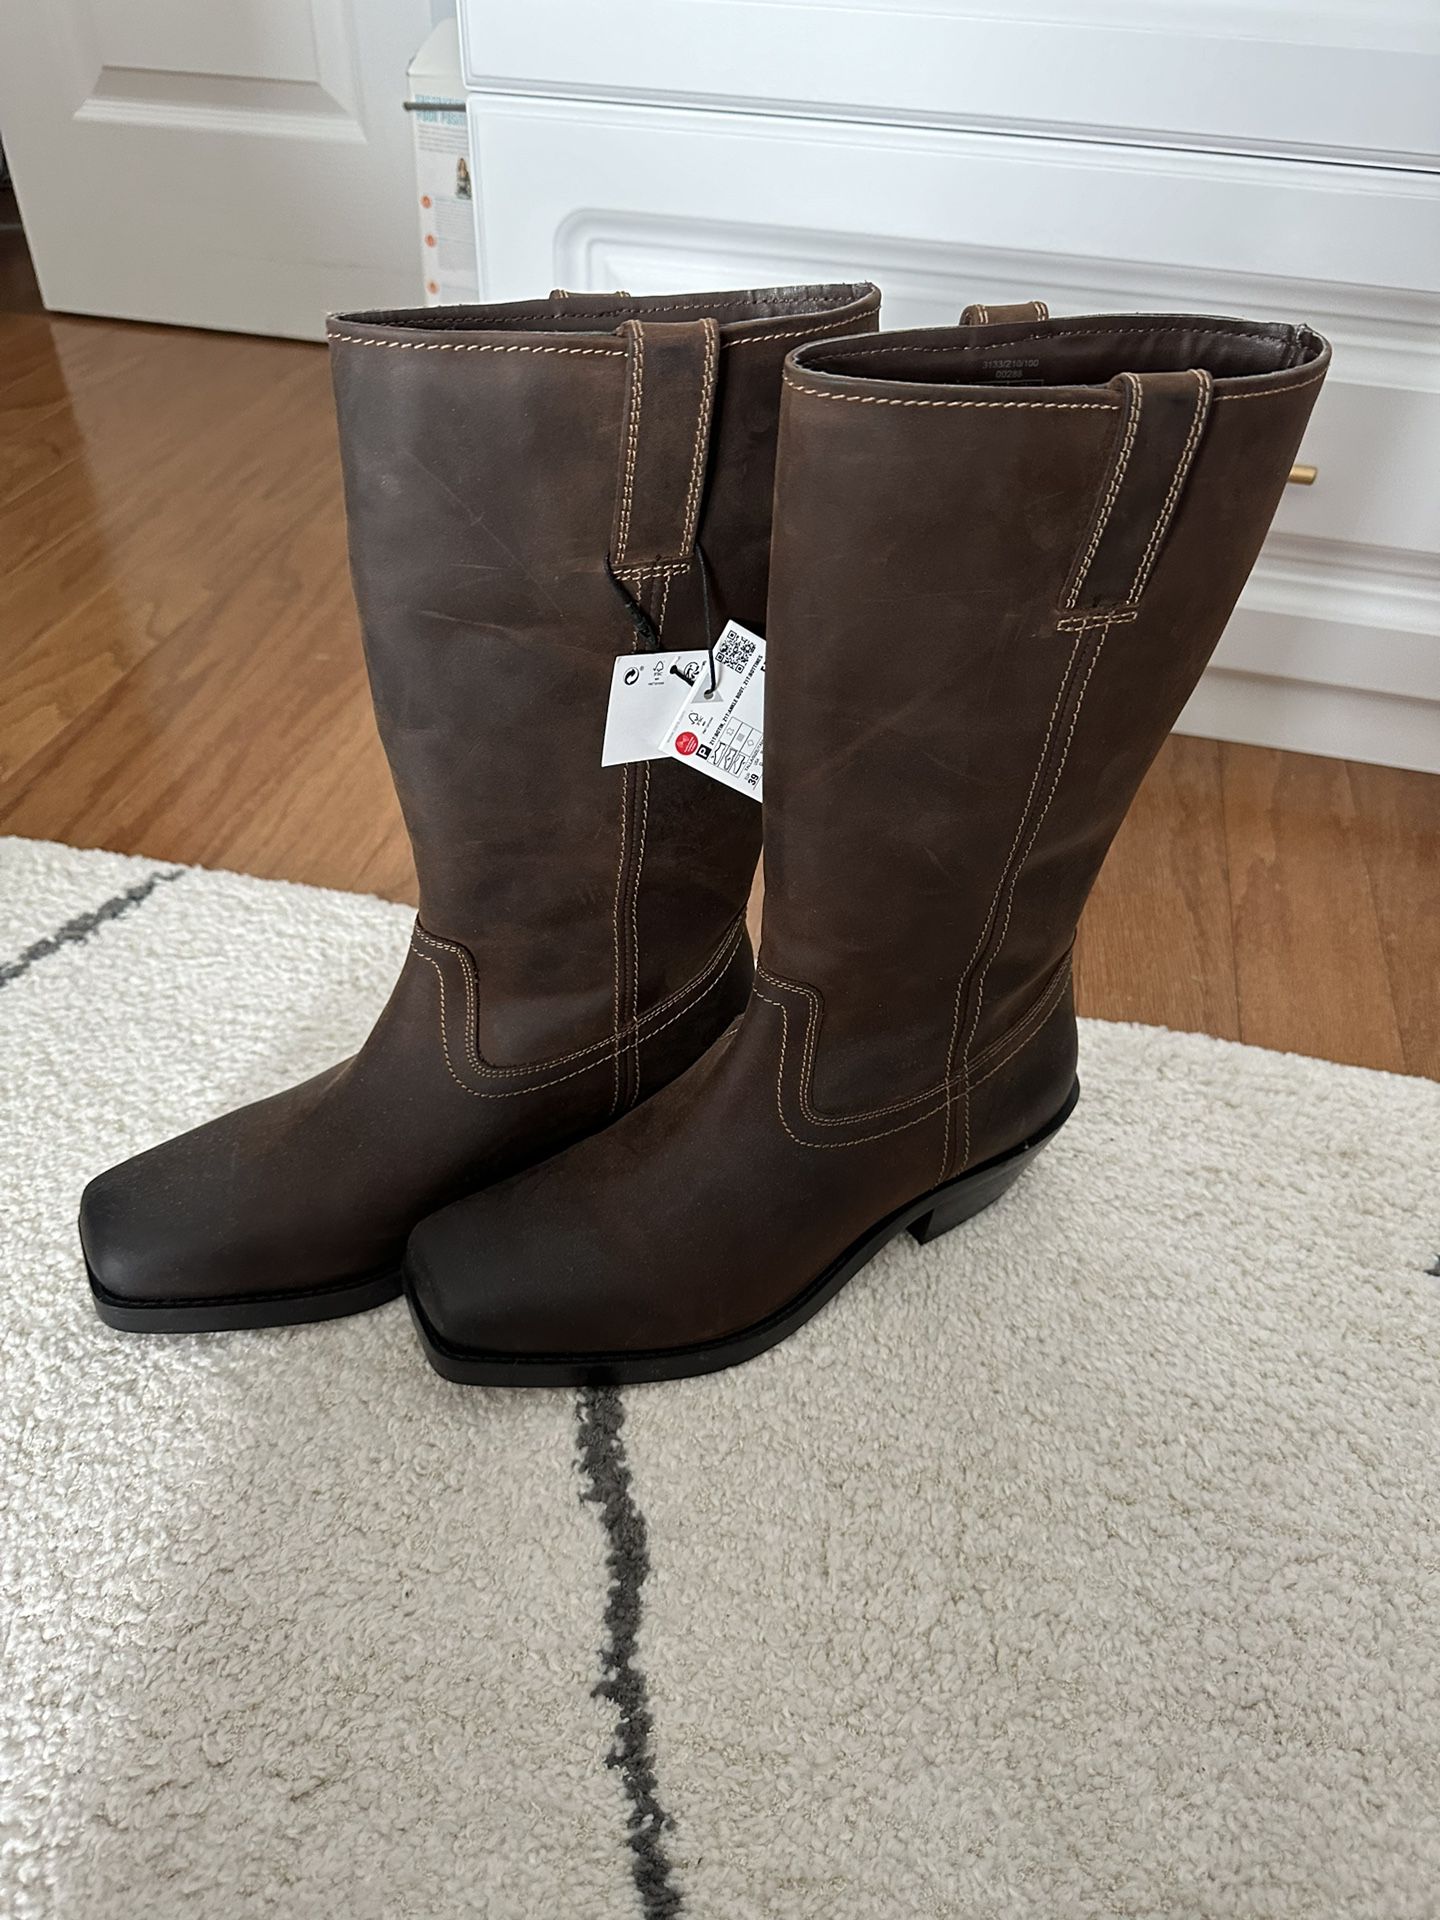 Zara Leather Boots, Size 8